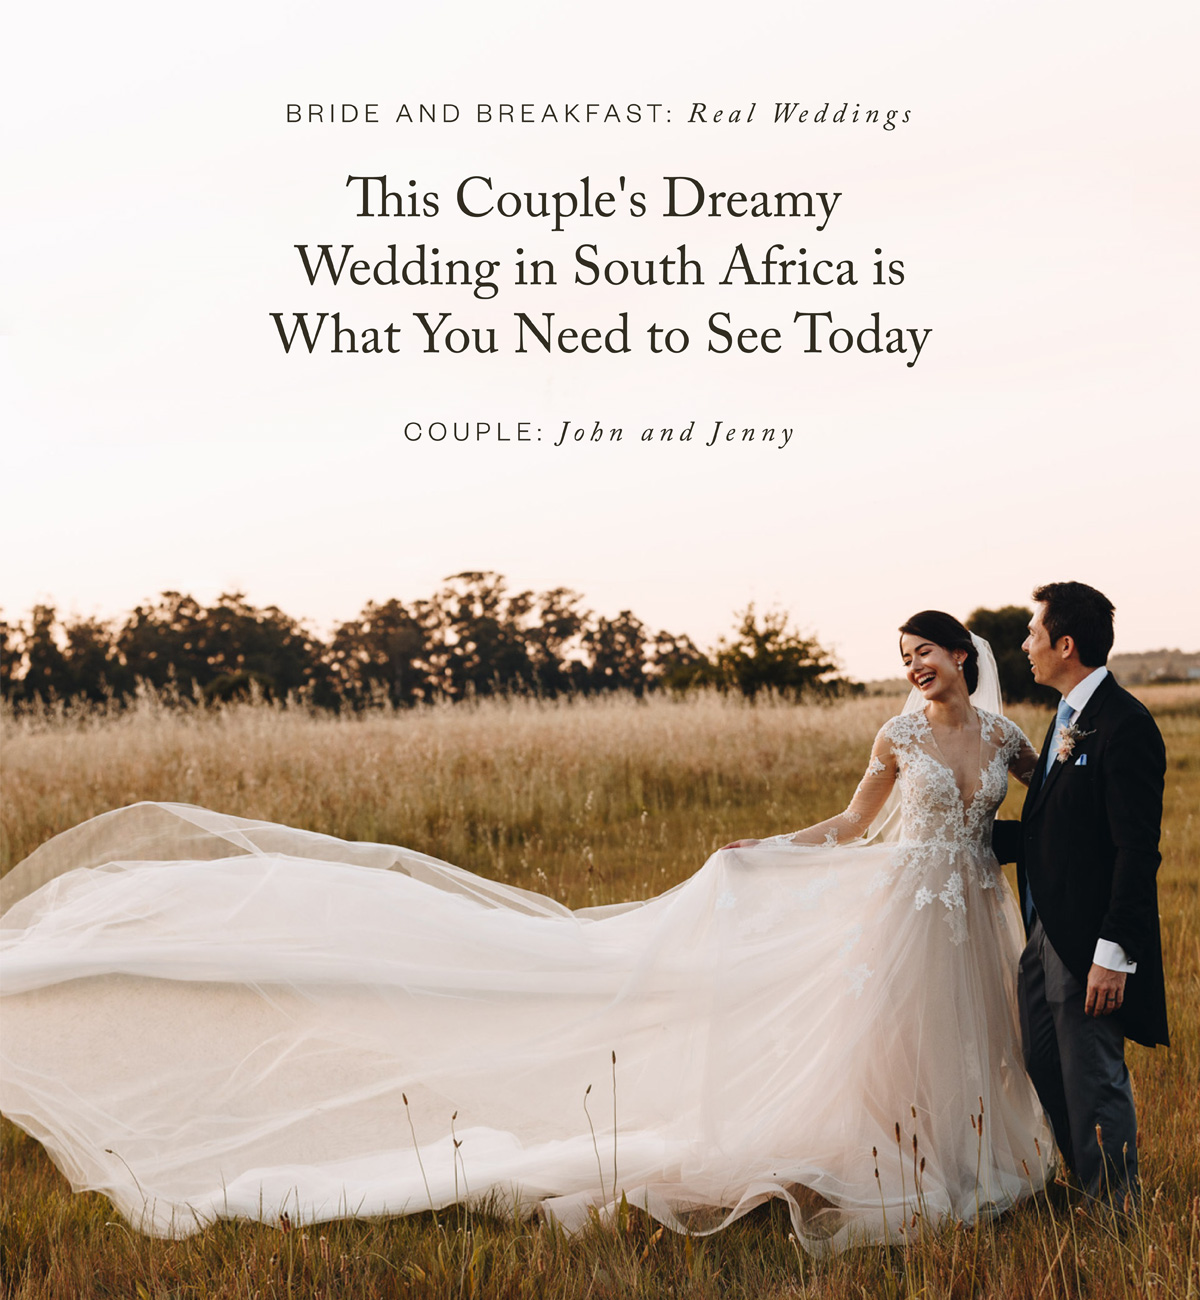 This Couple's Dreamy Garden Wedding in South Africa is What You Need to See Today